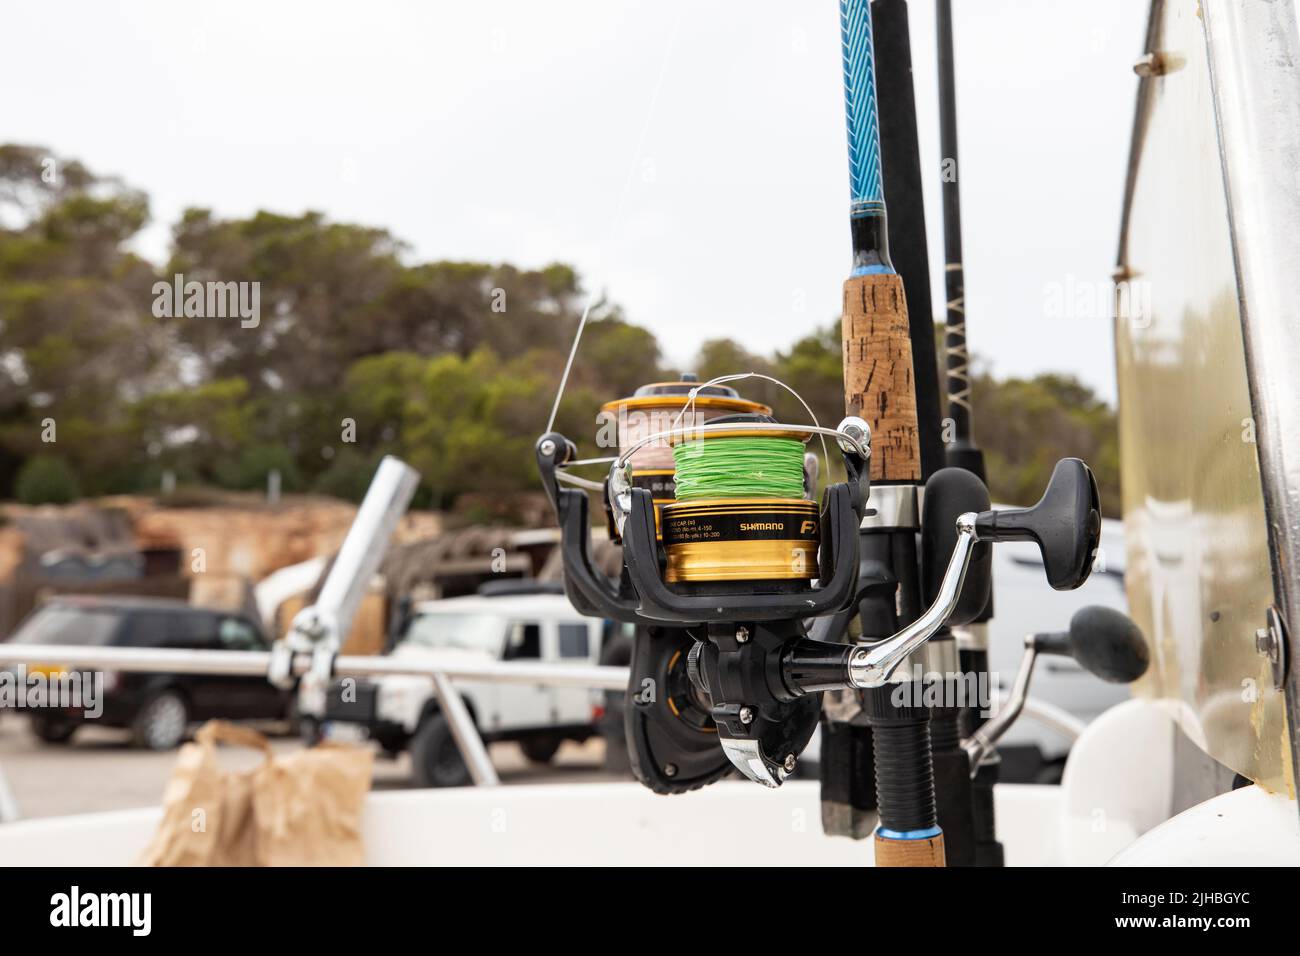 Fishing reels on Rods in Pou des Lle, Ibiza. Stock Photo